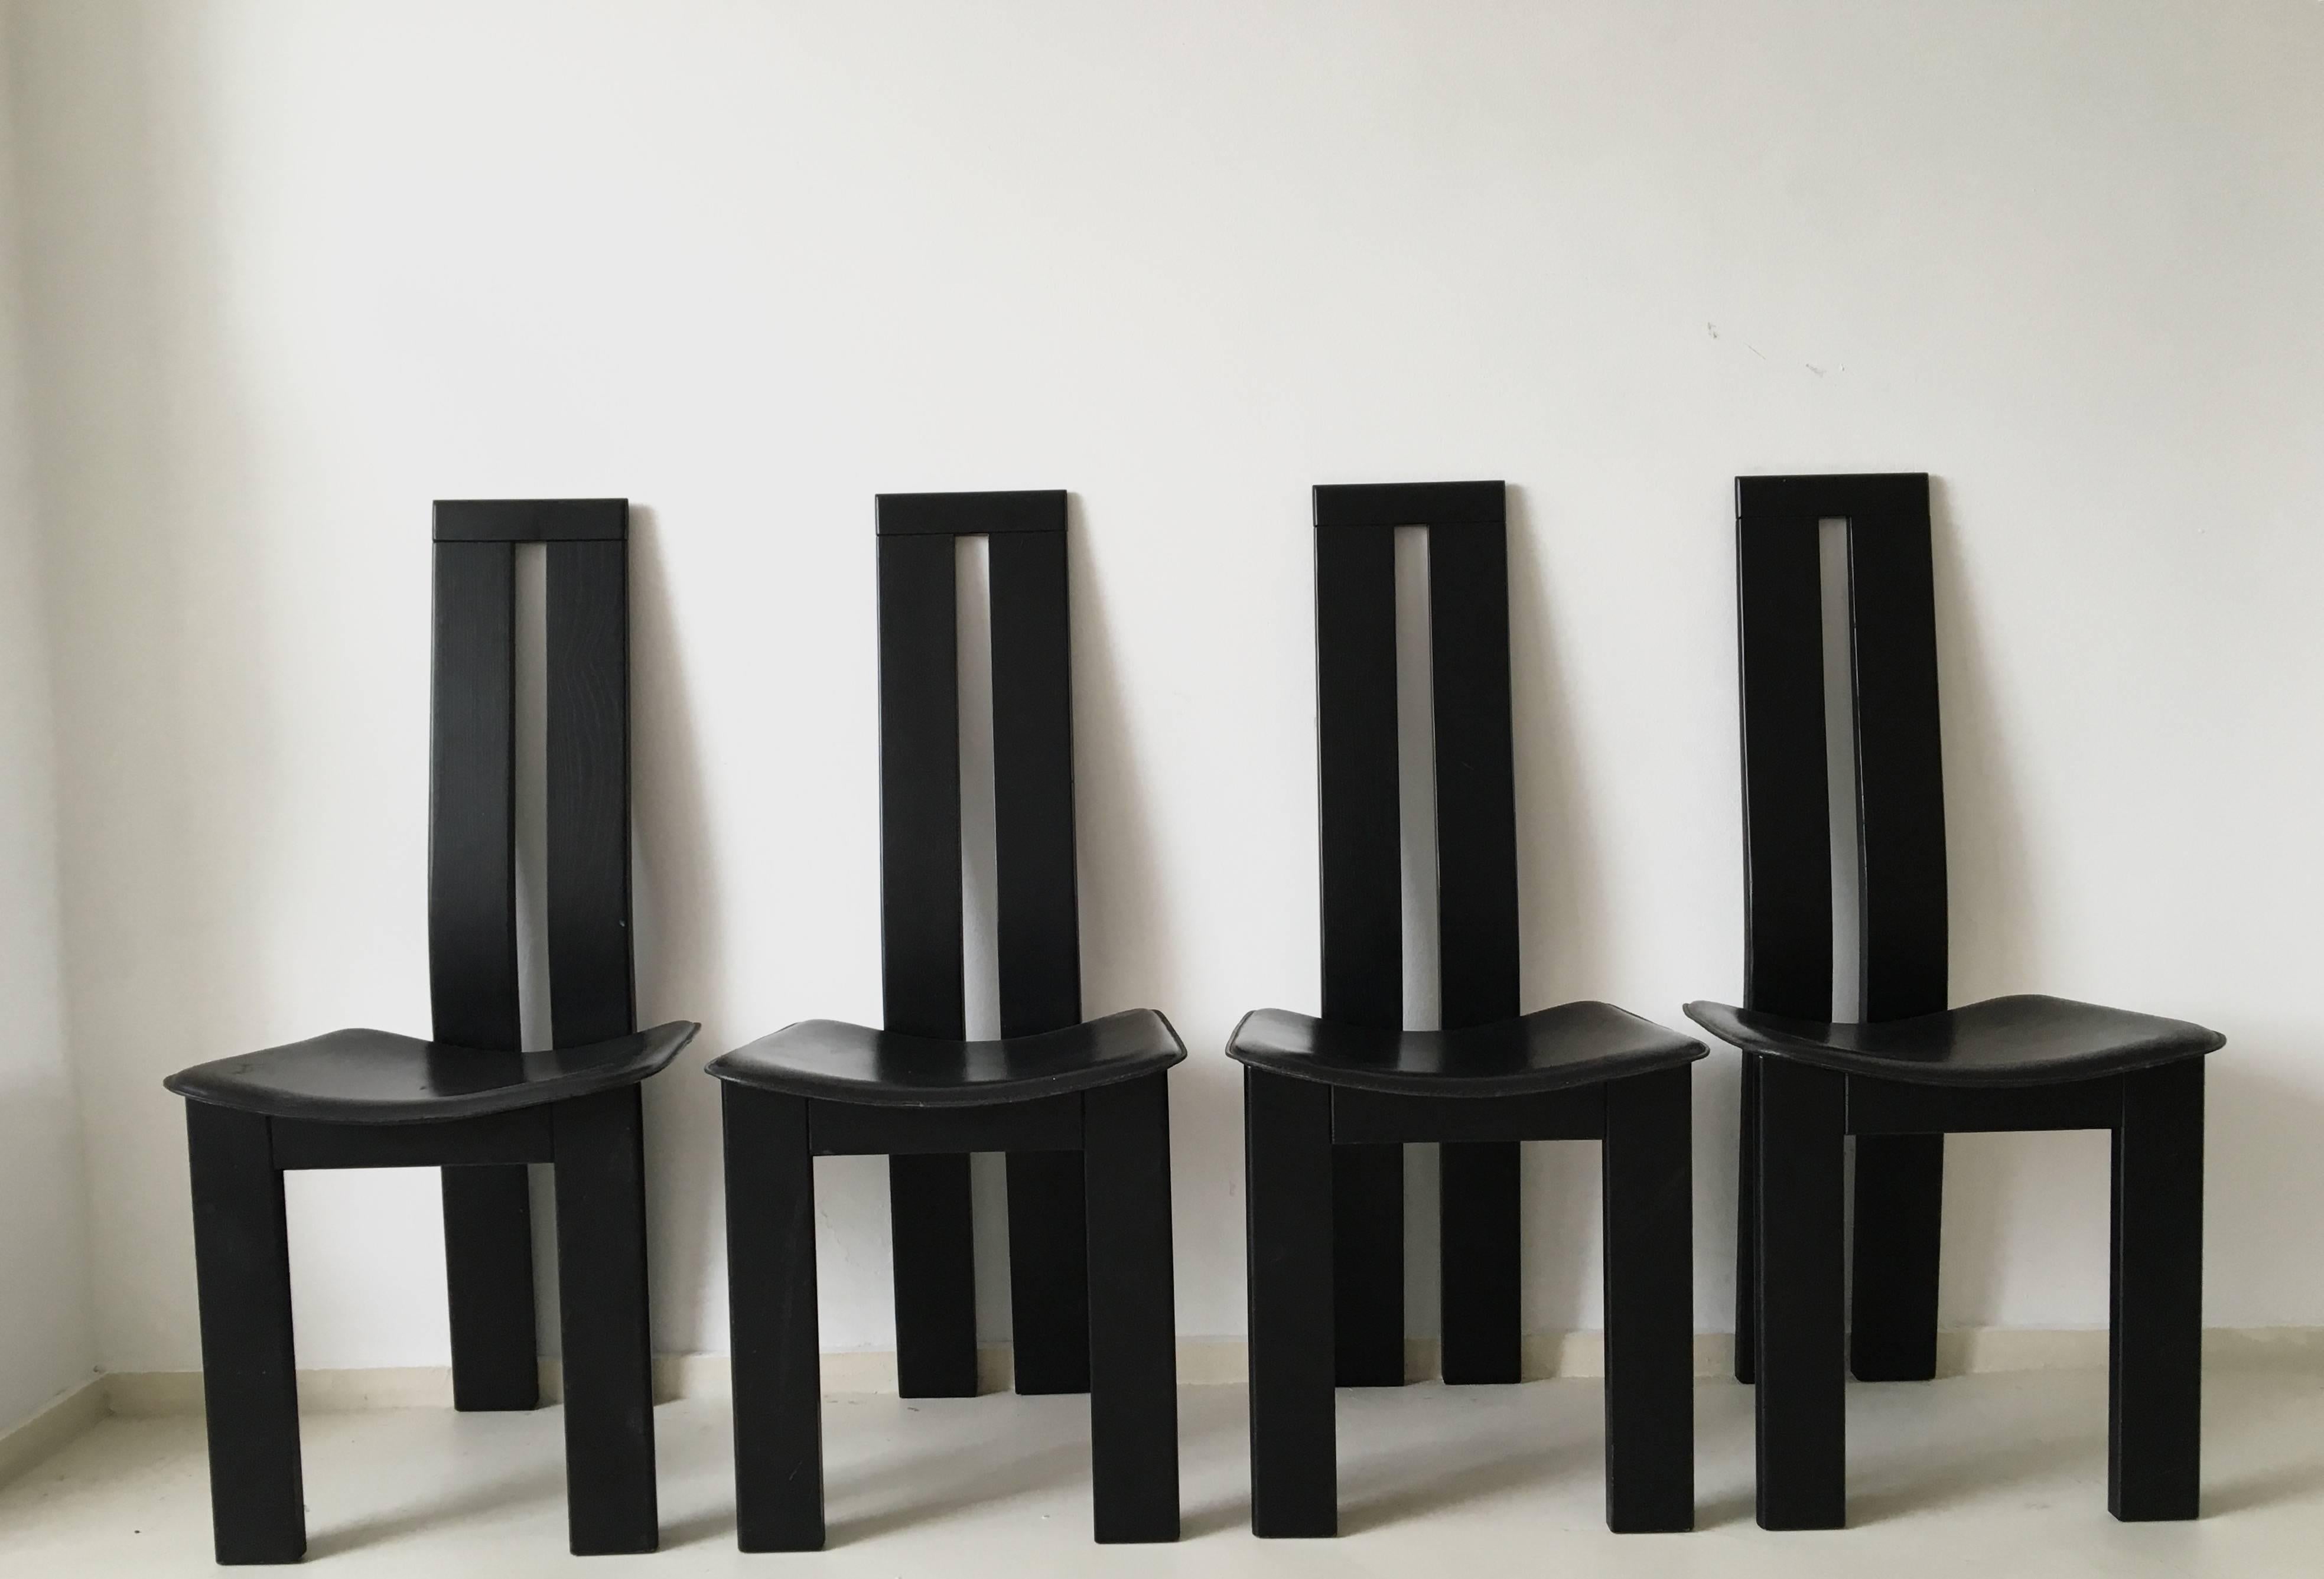 Set of four dining chairs designed by Pietro Constantini for Ello, Italy, circa 1970. The chairs are made from black lacquered wood with stitched black saddle leather seats. The chairs are labeled underneath the seat, and remain in a good condition